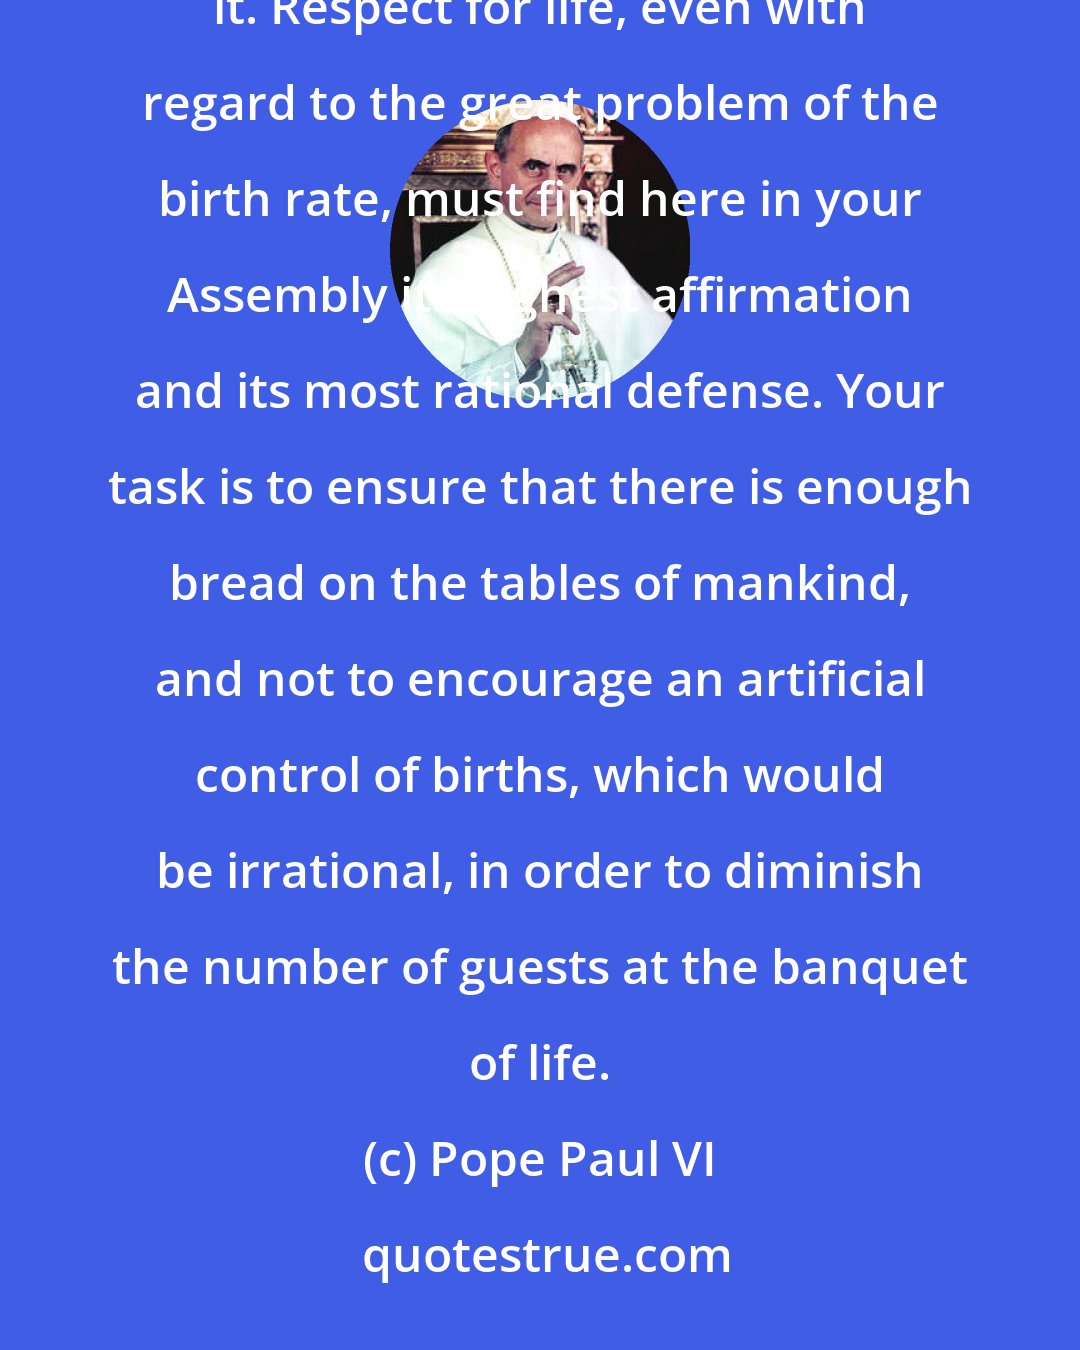 Pope Paul VI: For you deal here above all with human life, and human life is sacred; no one may dare make an attempt upon it. Respect for life, even with regard to the great problem of the birth rate, must find here in your Assembly its highest affirmation and its most rational defense. Your task is to ensure that there is enough bread on the tables of mankind, and not to encourage an artificial control of births, which would be irrational, in order to diminish the number of guests at the banquet of life.